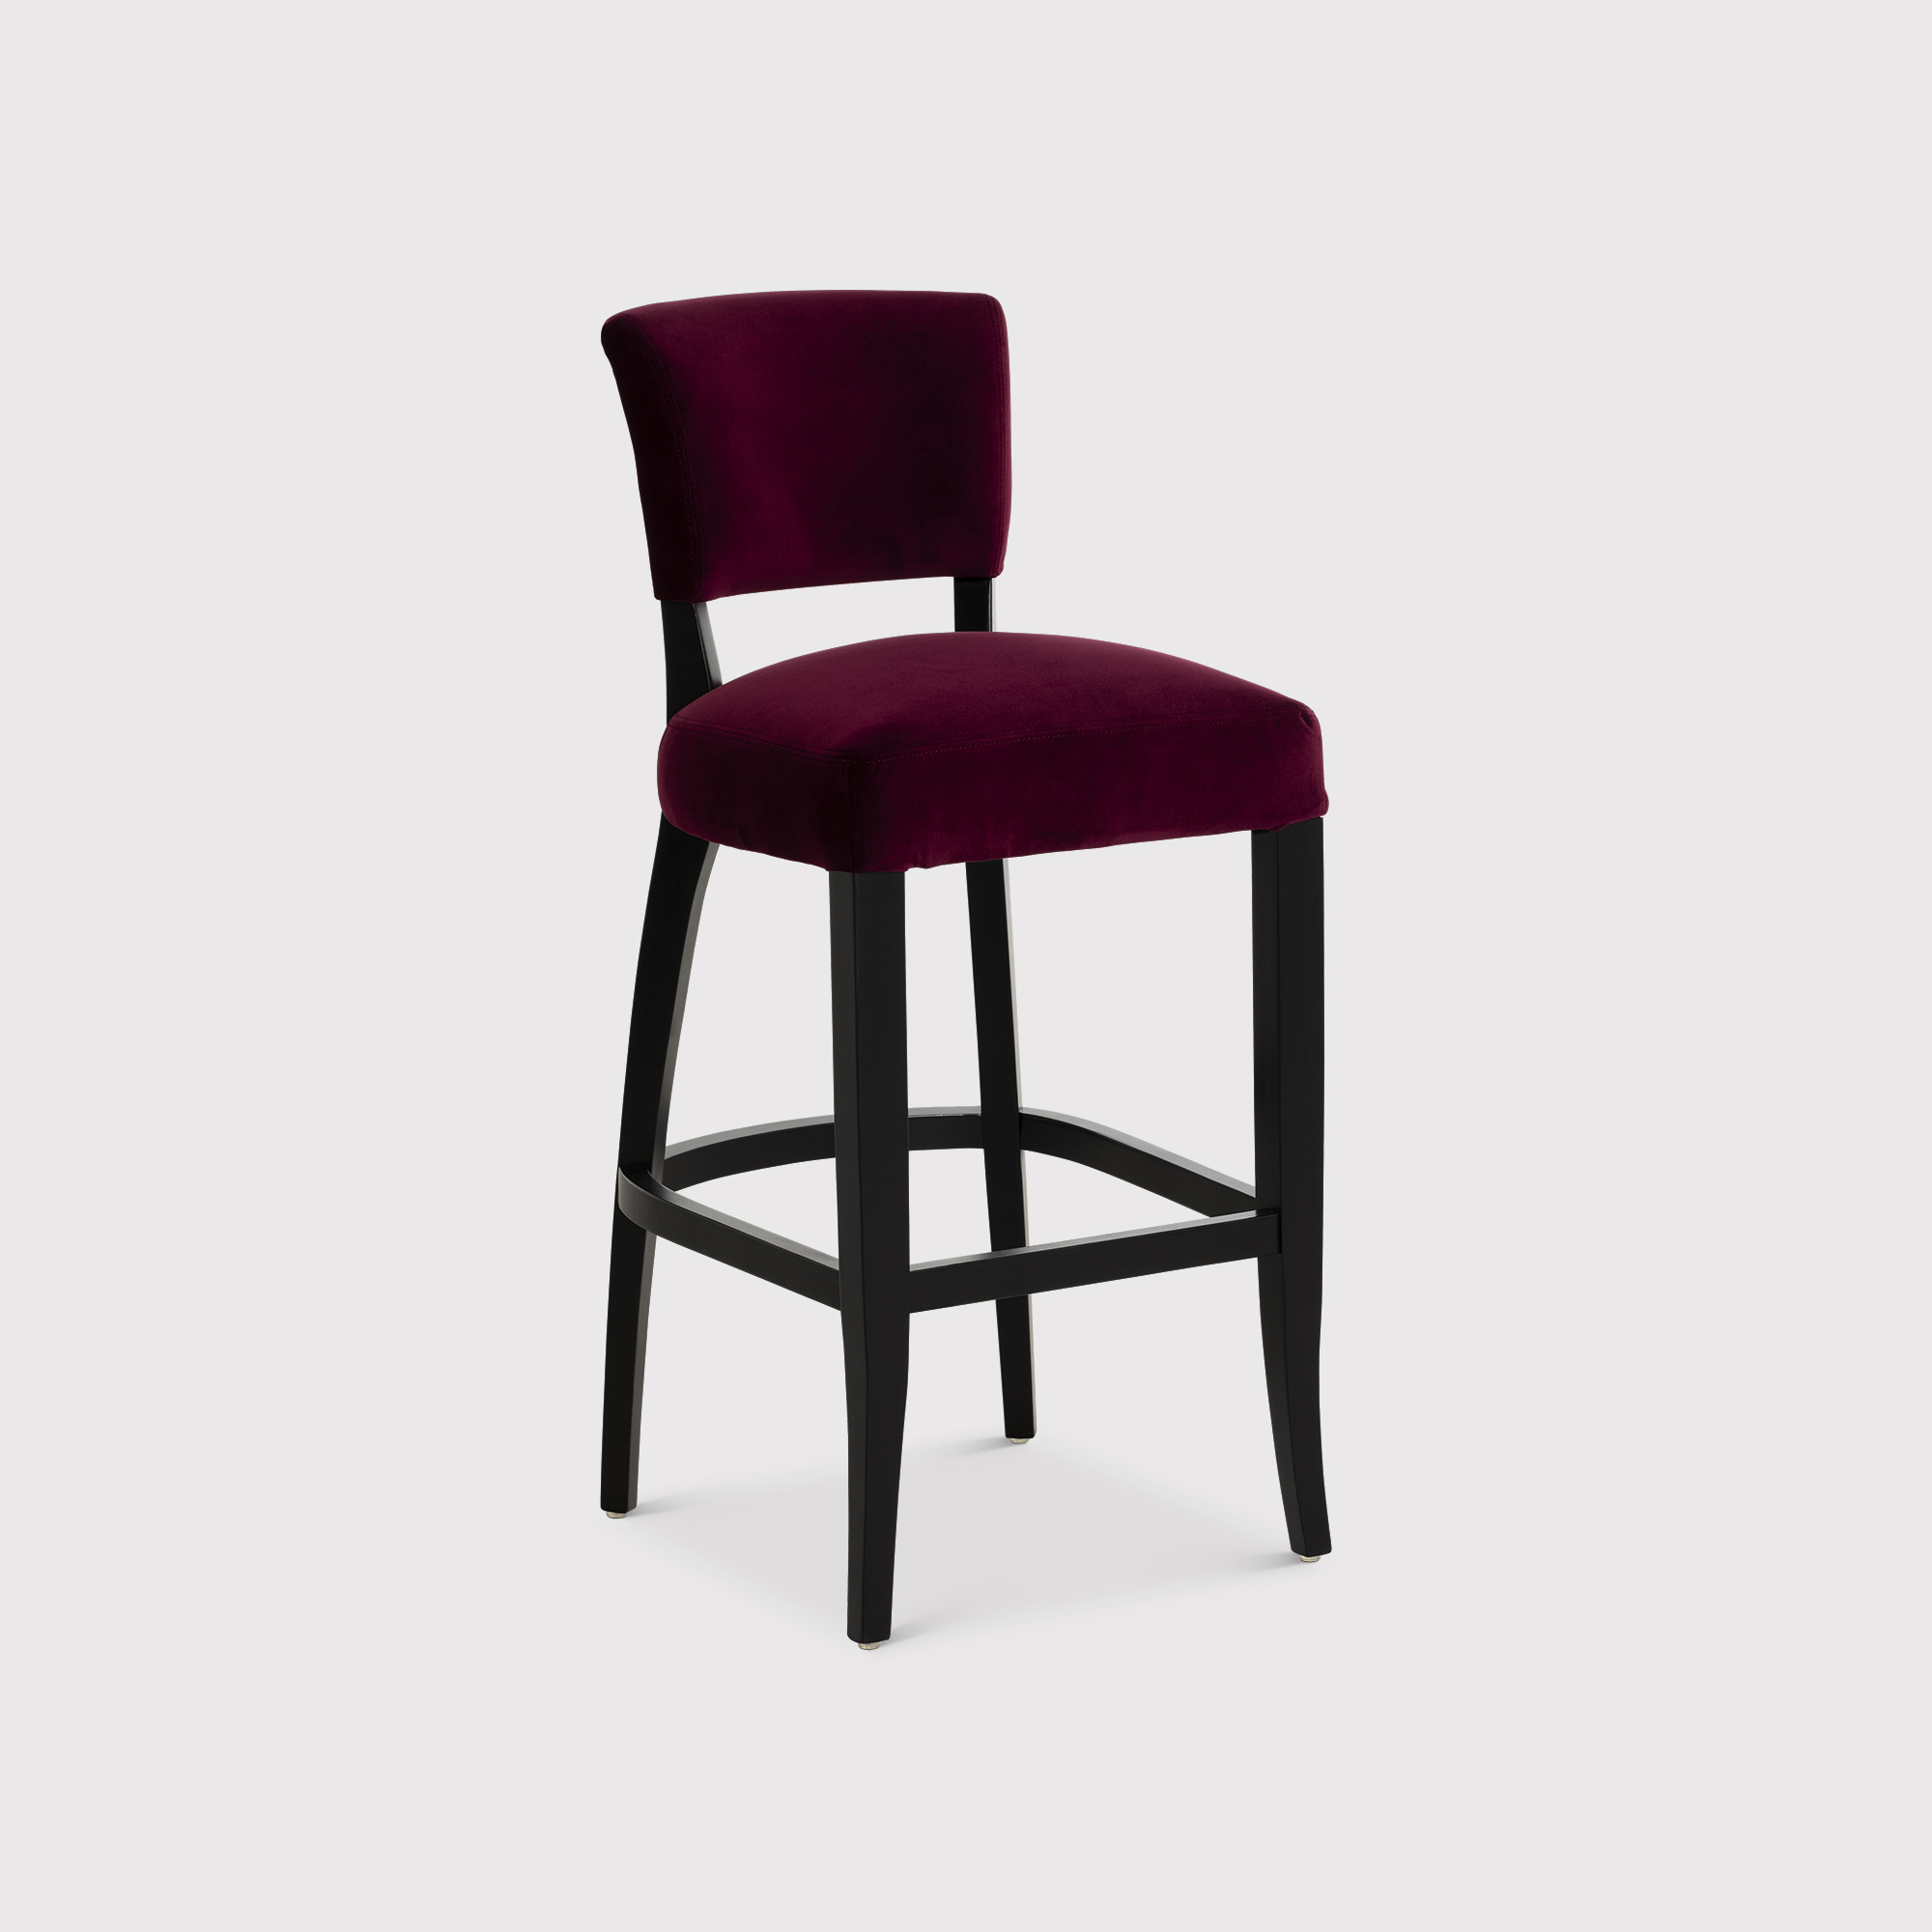 Timothy Oulton Mimi Barstool, Red | Barker & Stonehouse